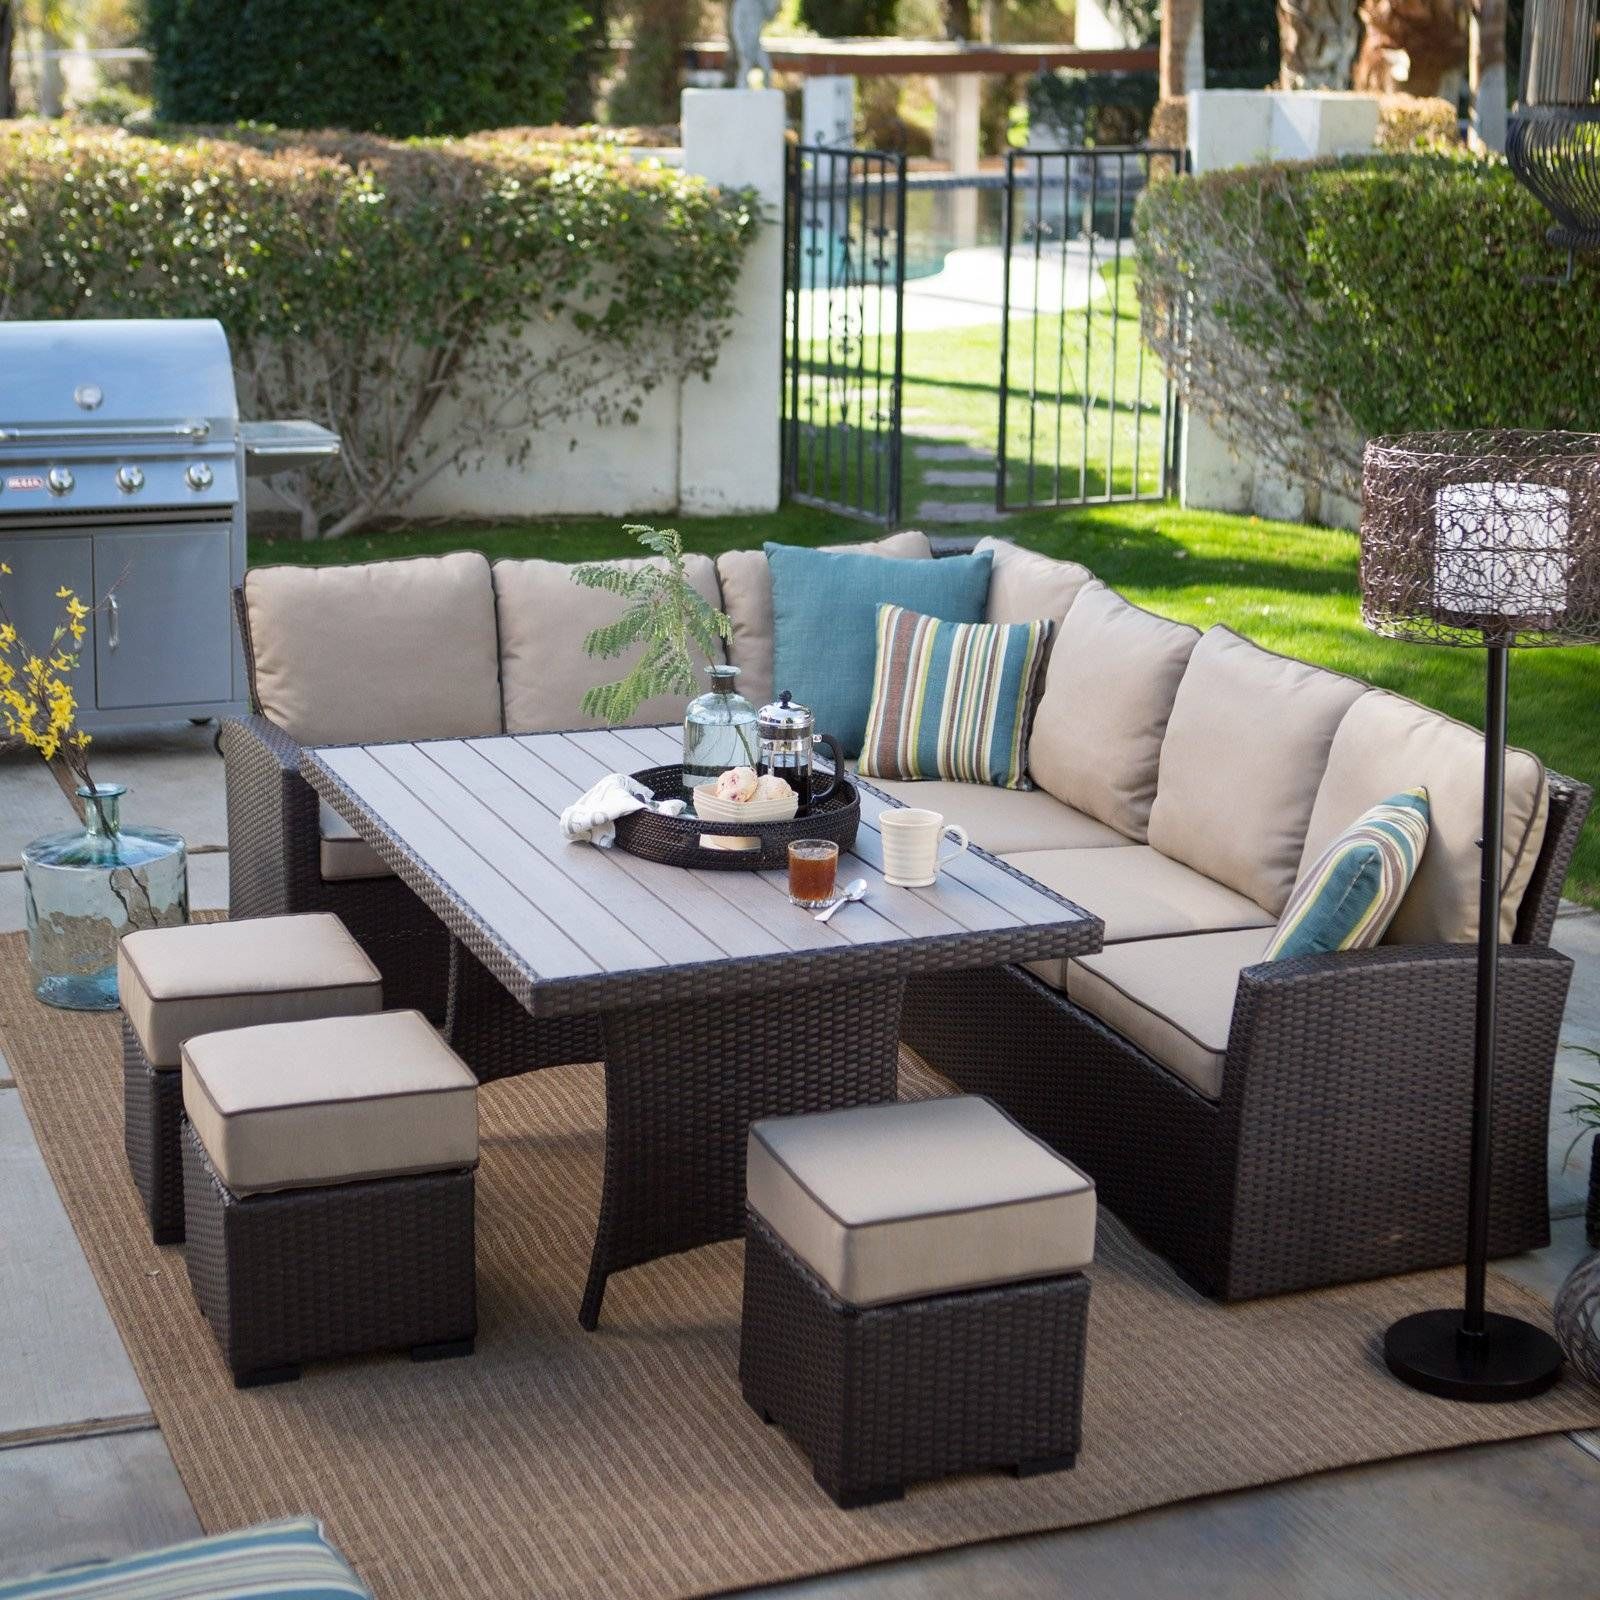 Belham Living Monticello All Weather Outdoor Wicker Sofa Sectional Intended For Cheap Patio Sofas (View 7 of 30)